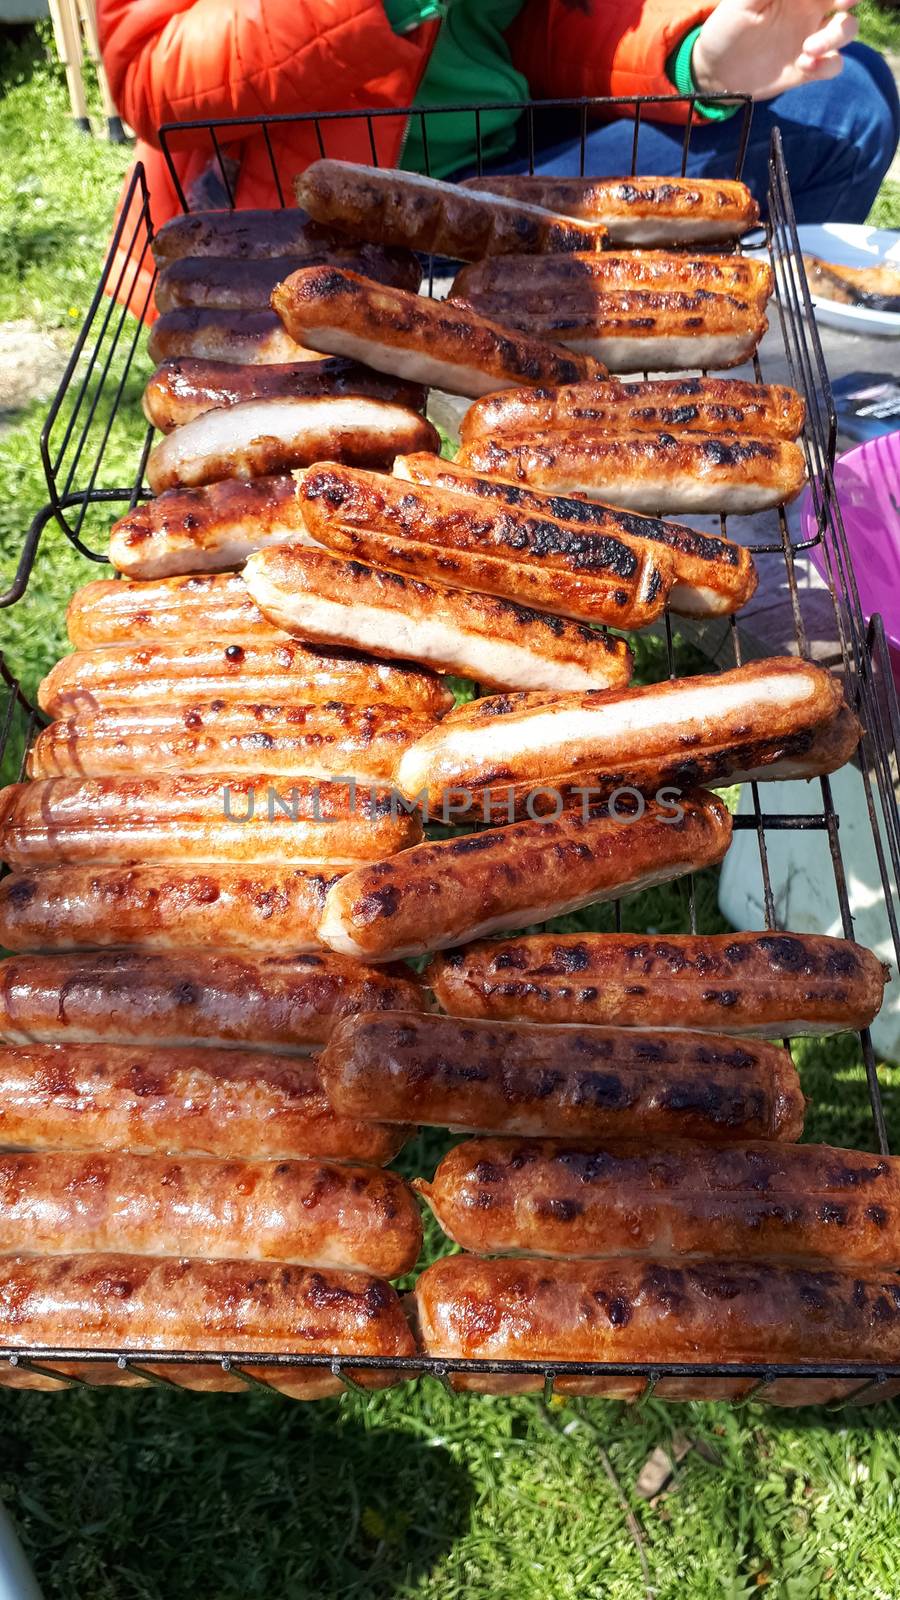 Grilled sausages on grid. Barbecue in the backyard. by fedoseevaolga